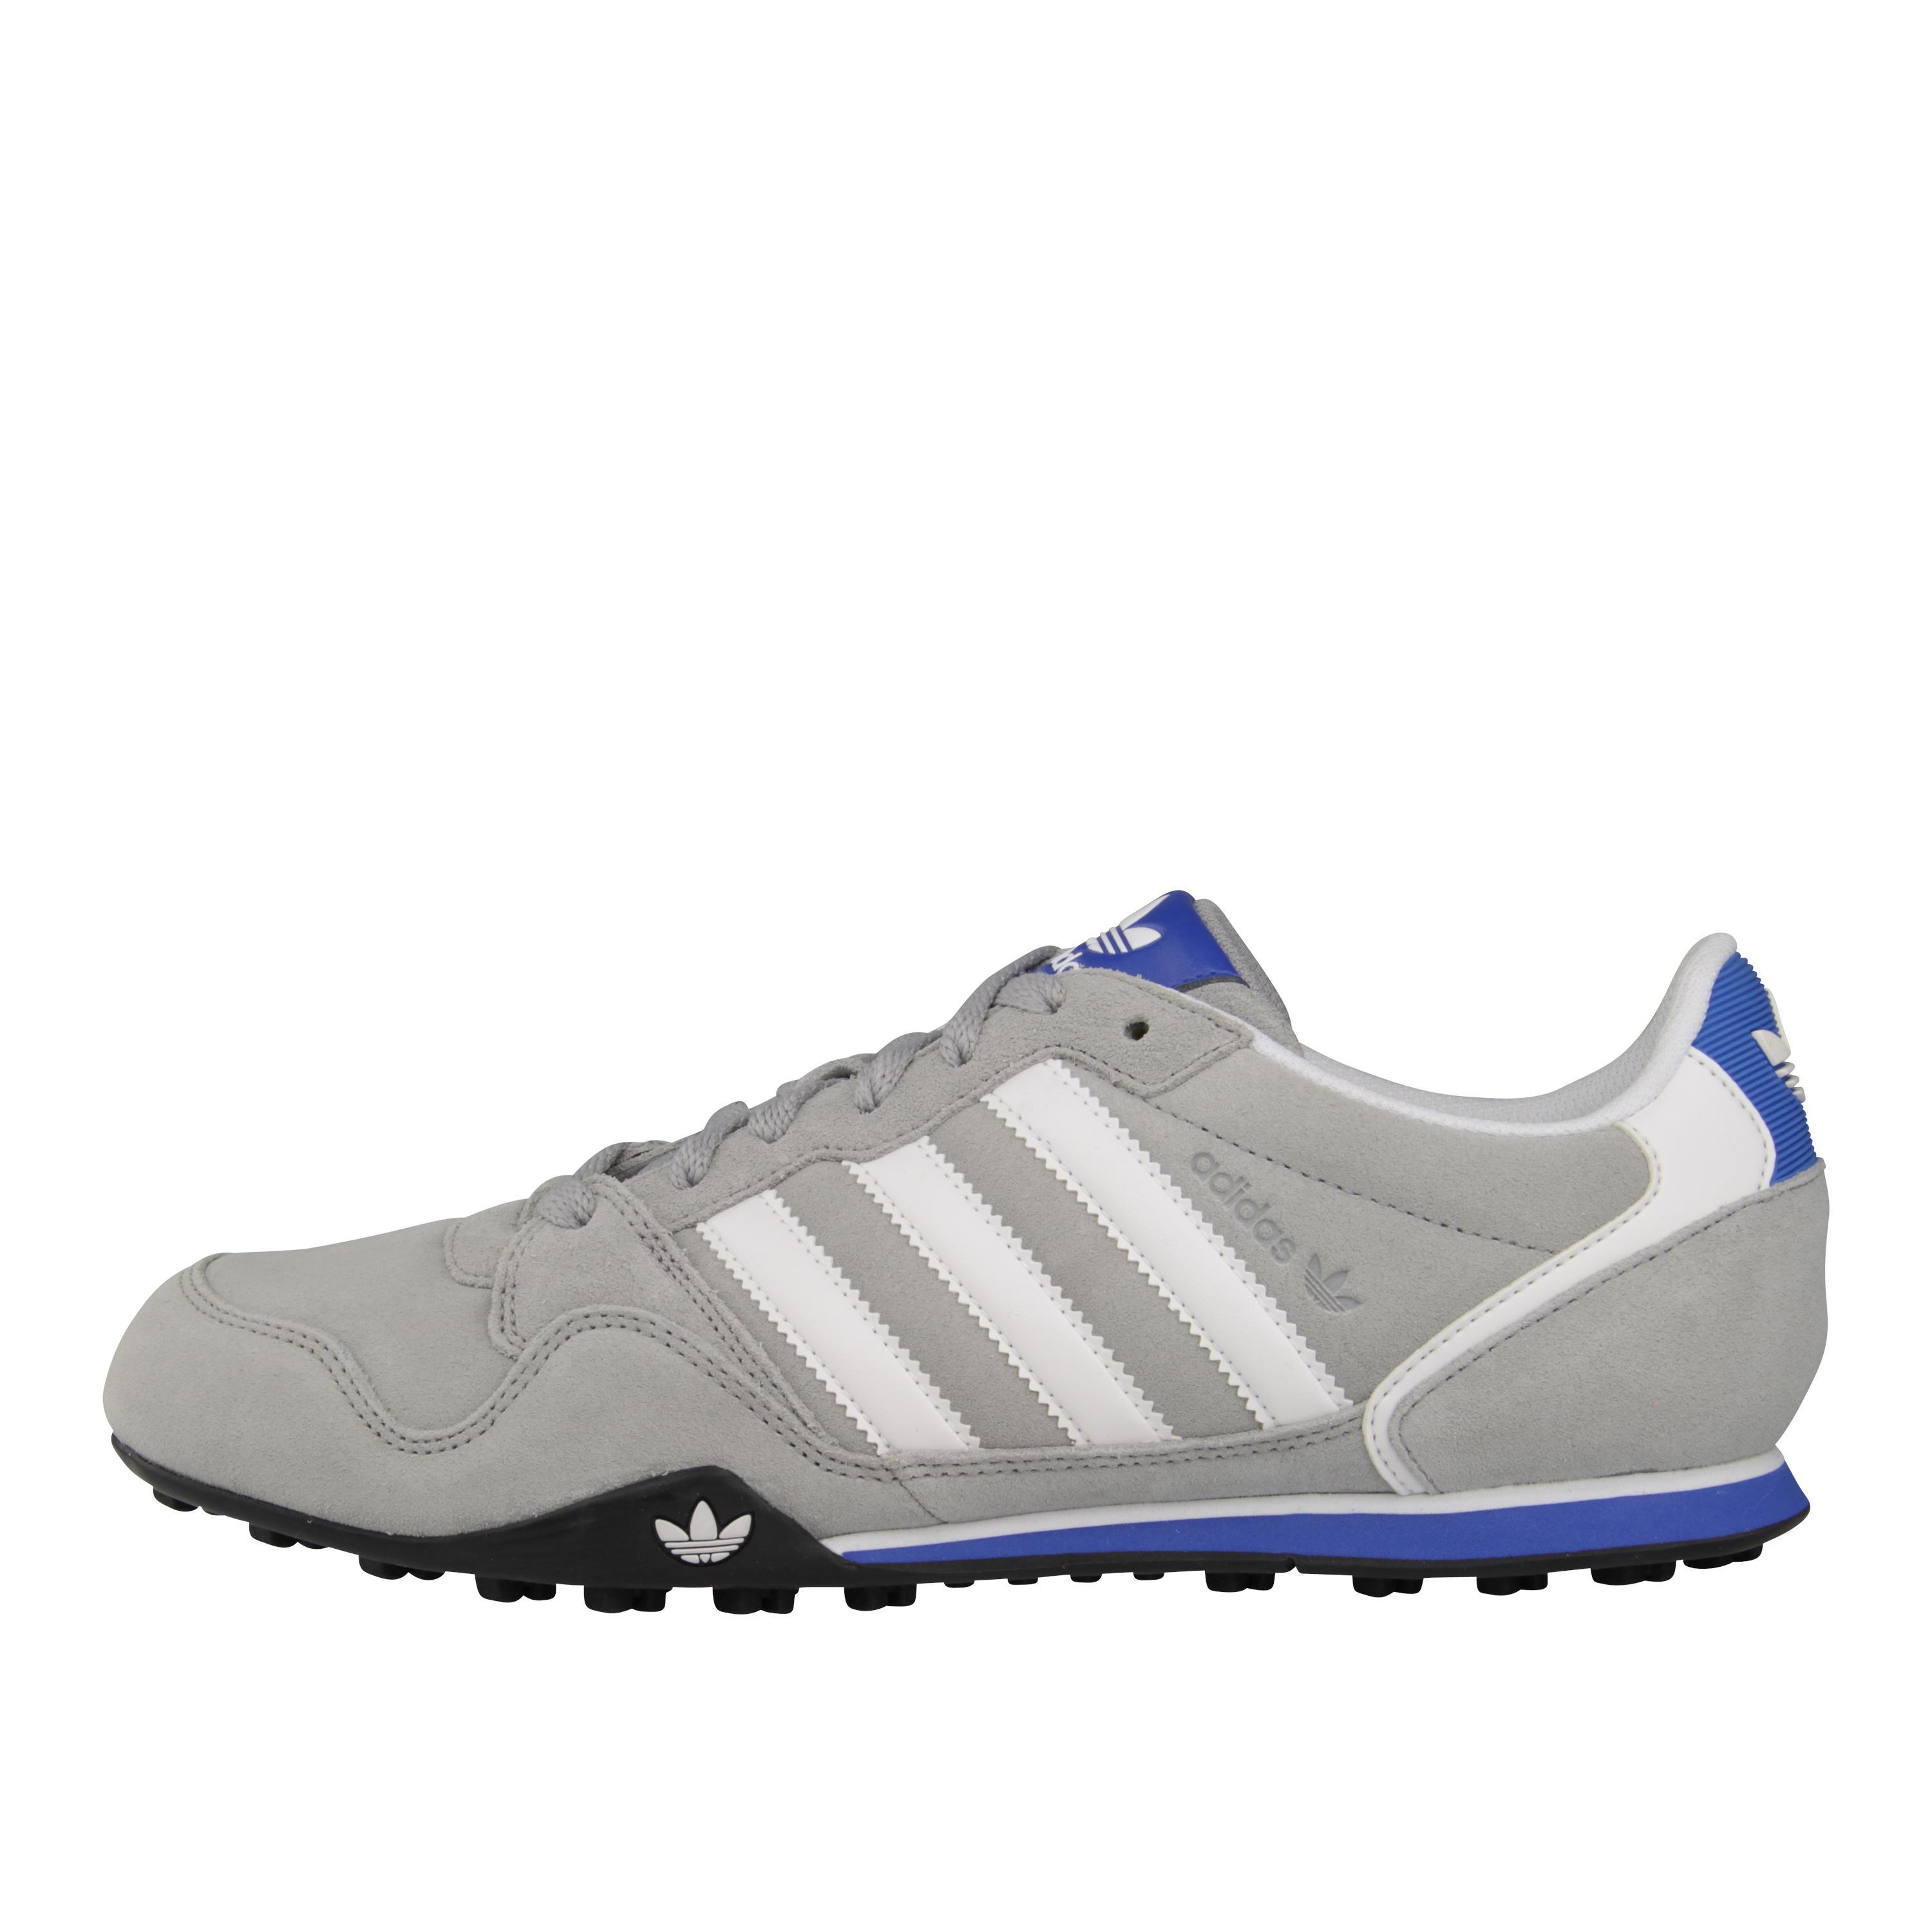 adidas zx country 3